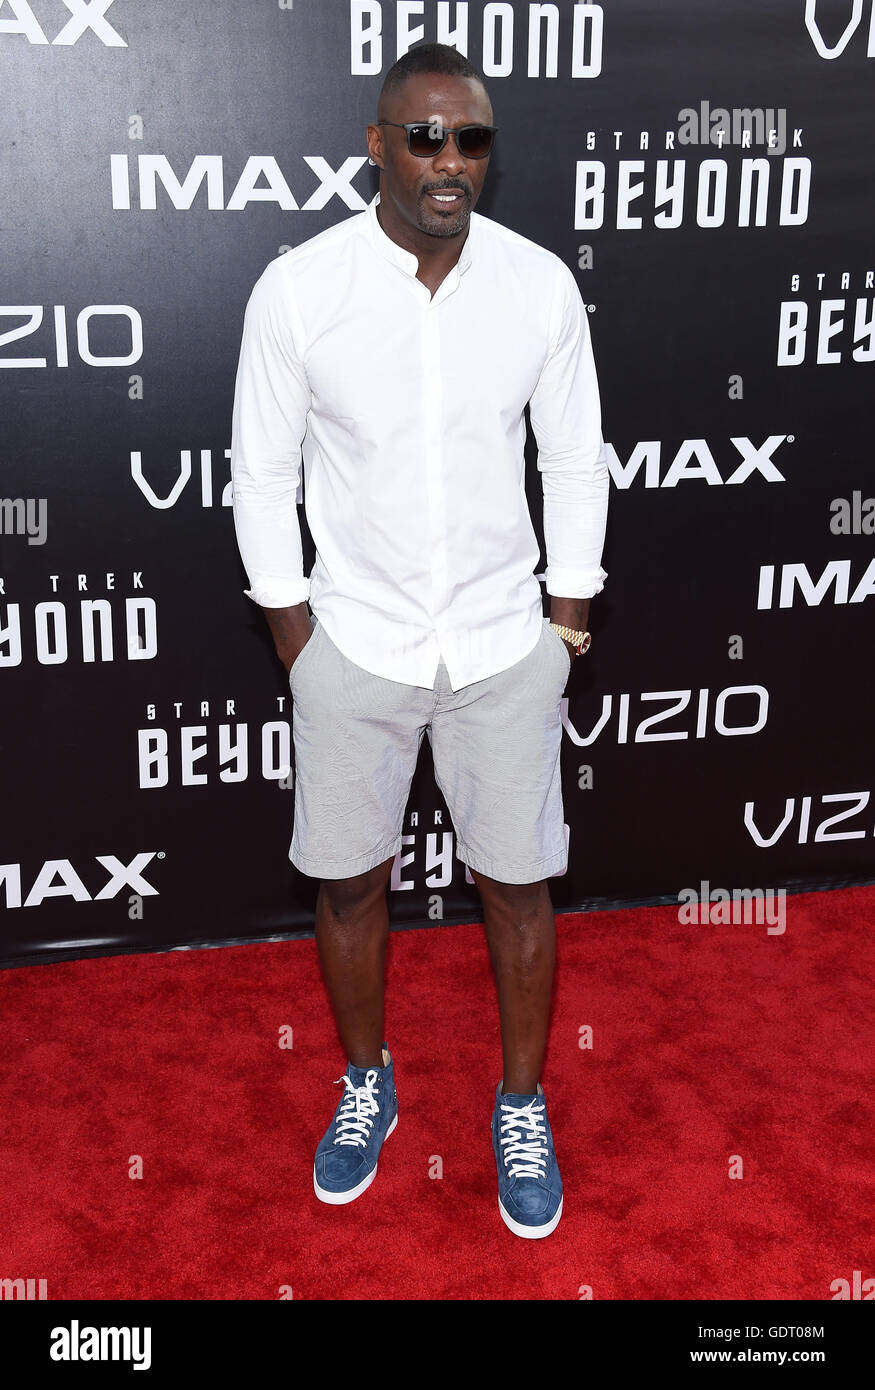 San Diego, California, USA. 20th July, 2016. Idris Elba arrives for the premiere of the film 'Star Trek Beyond' at the Embarcadero Marina Park. Credit:  Lisa O'Connor/ZUMA Wire/Alamy Live News Stock Photo